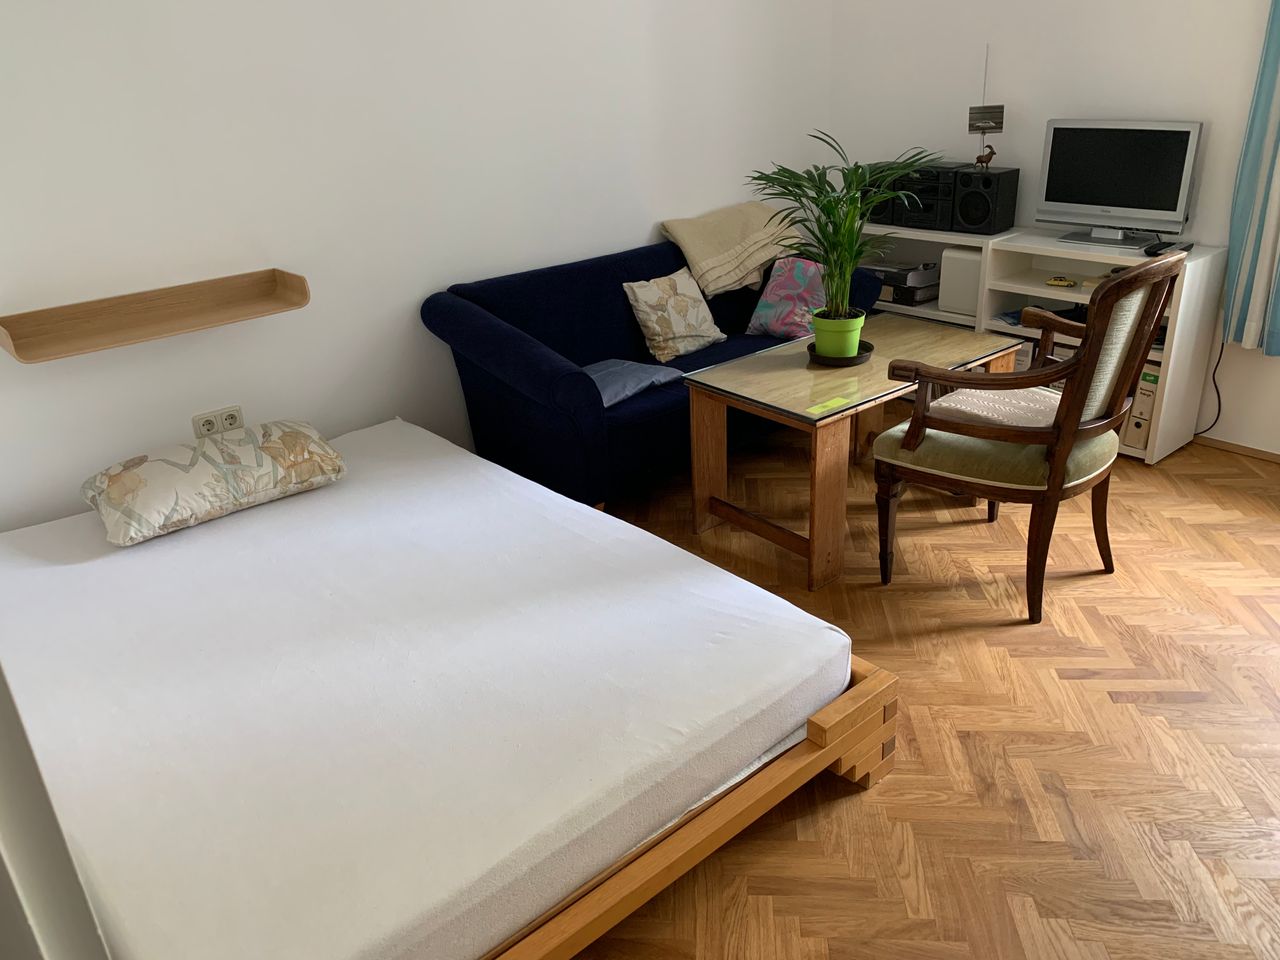 Fantastic & nice apartment located in München